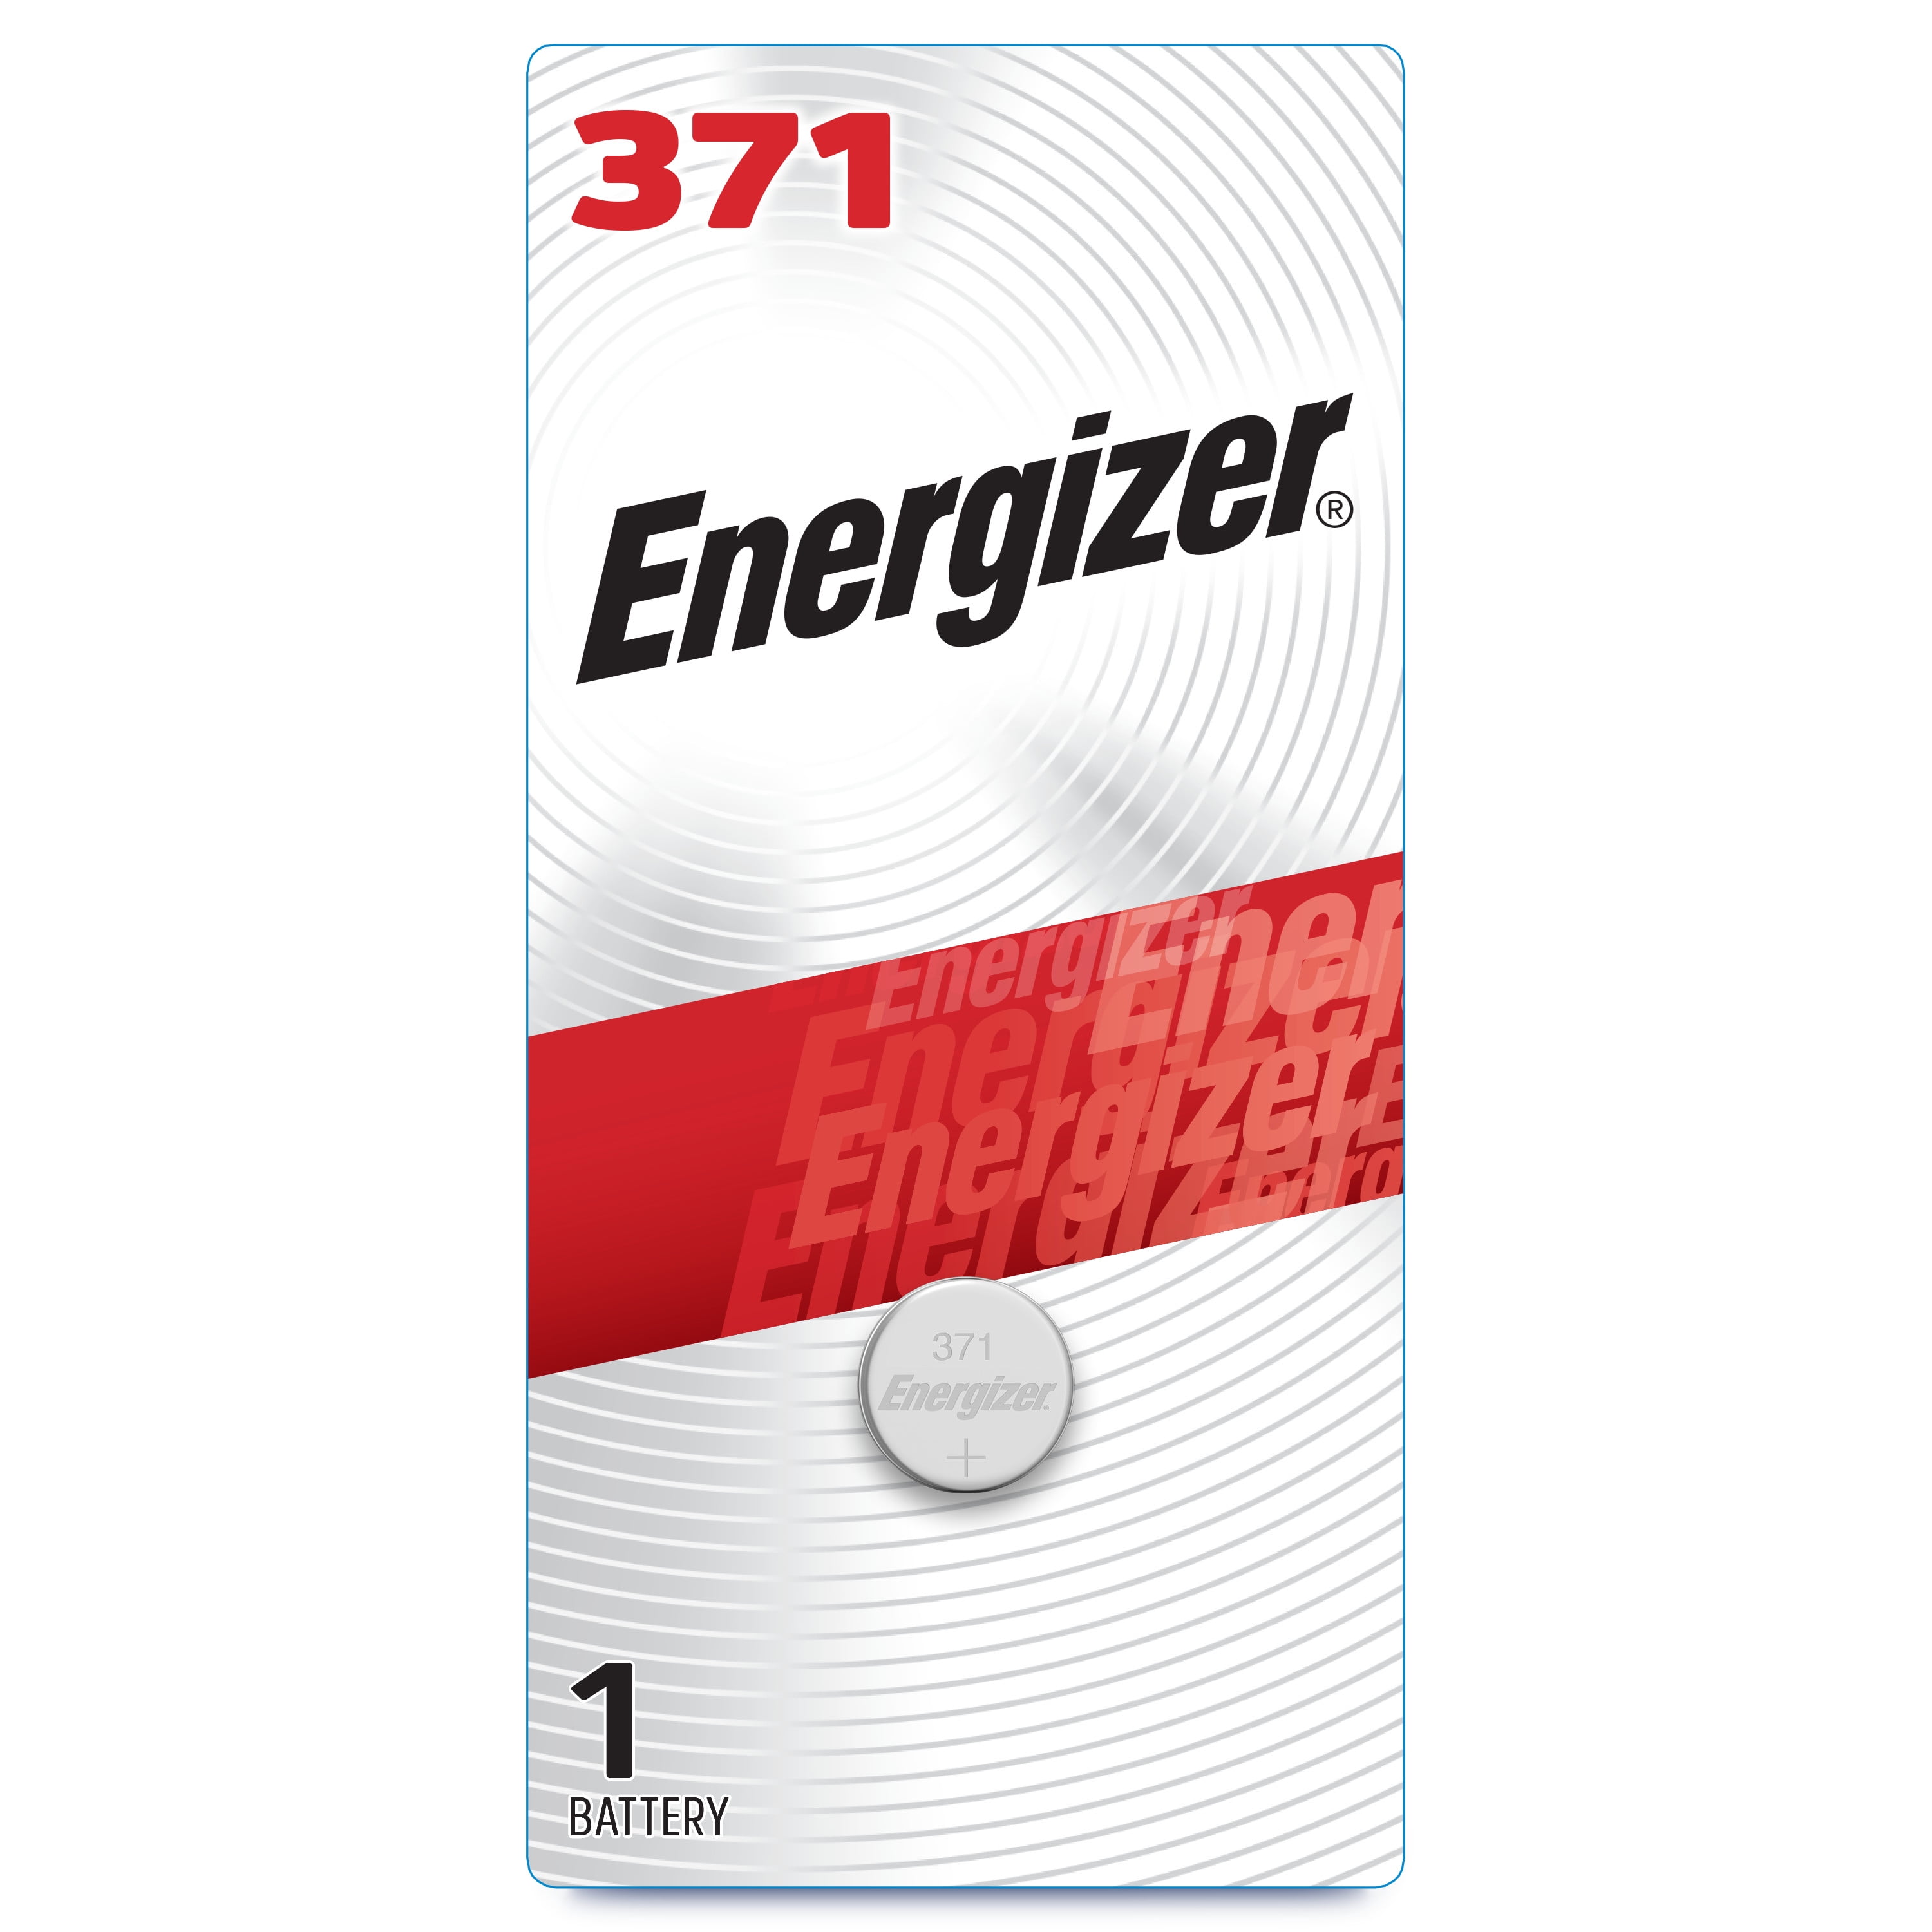 buy-energizer-371-silver-oxide-button-battery-371-cell-1-pack-online